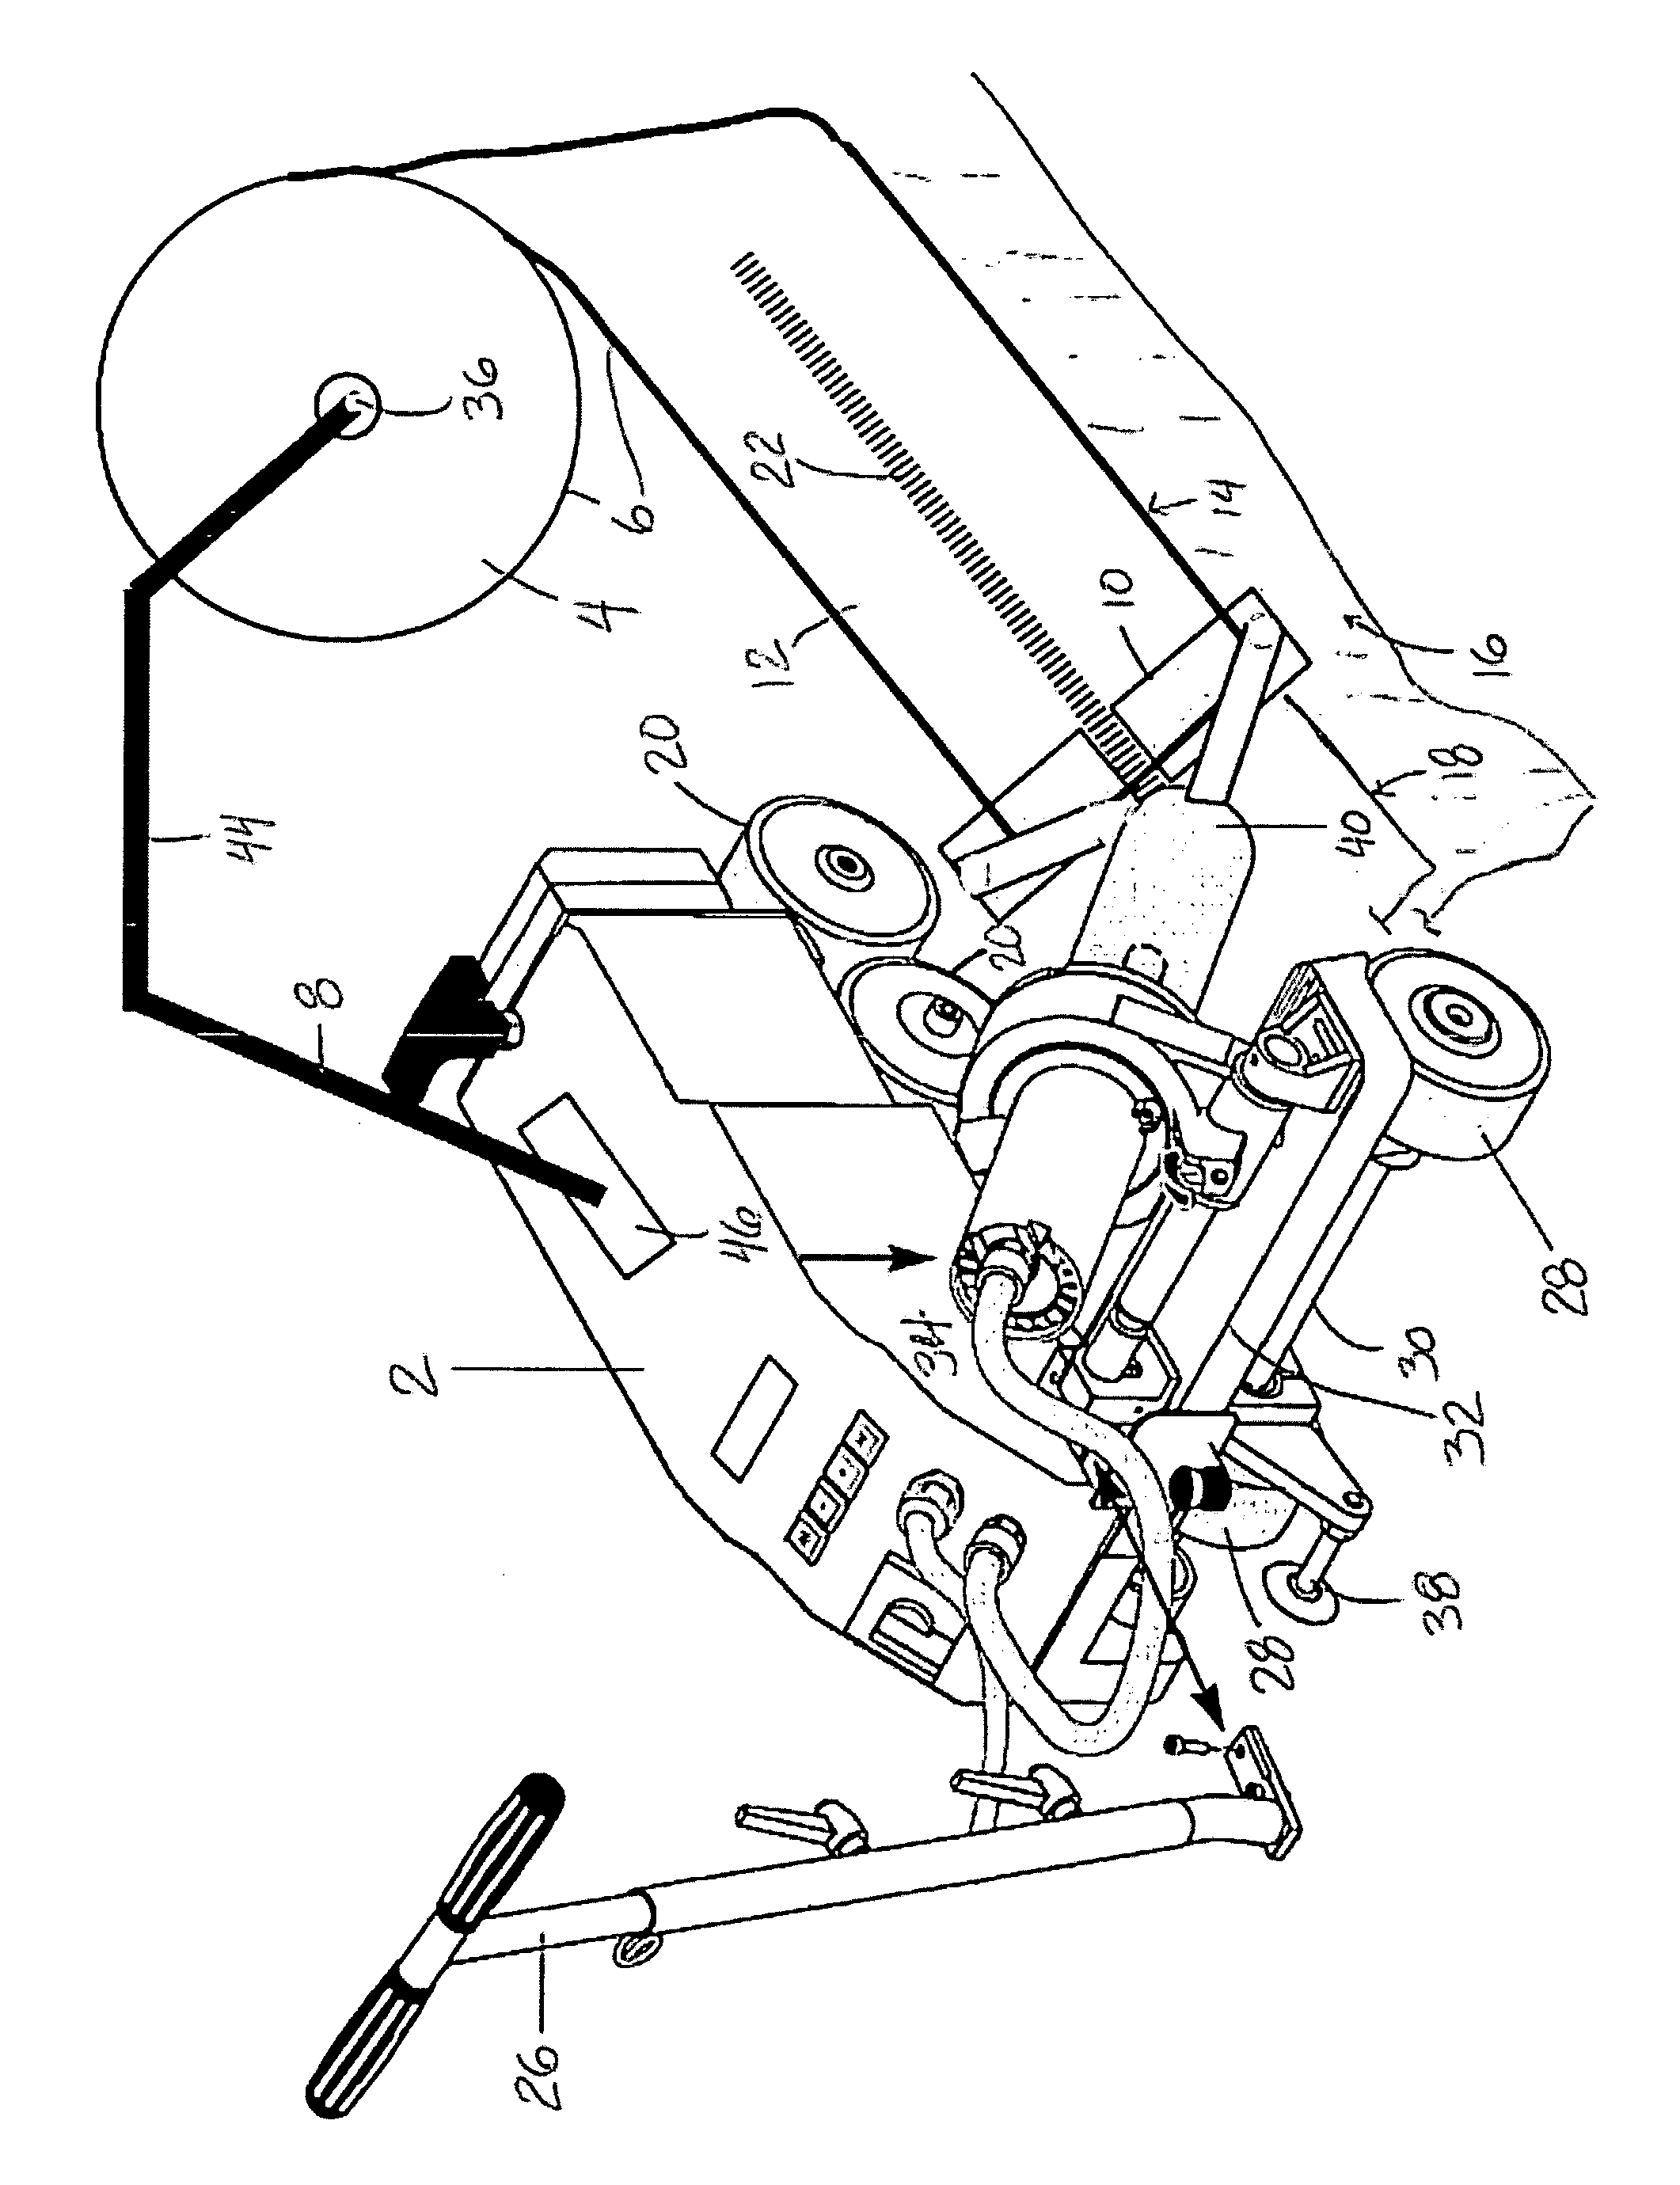 Apparatus for creating an encased cable seam